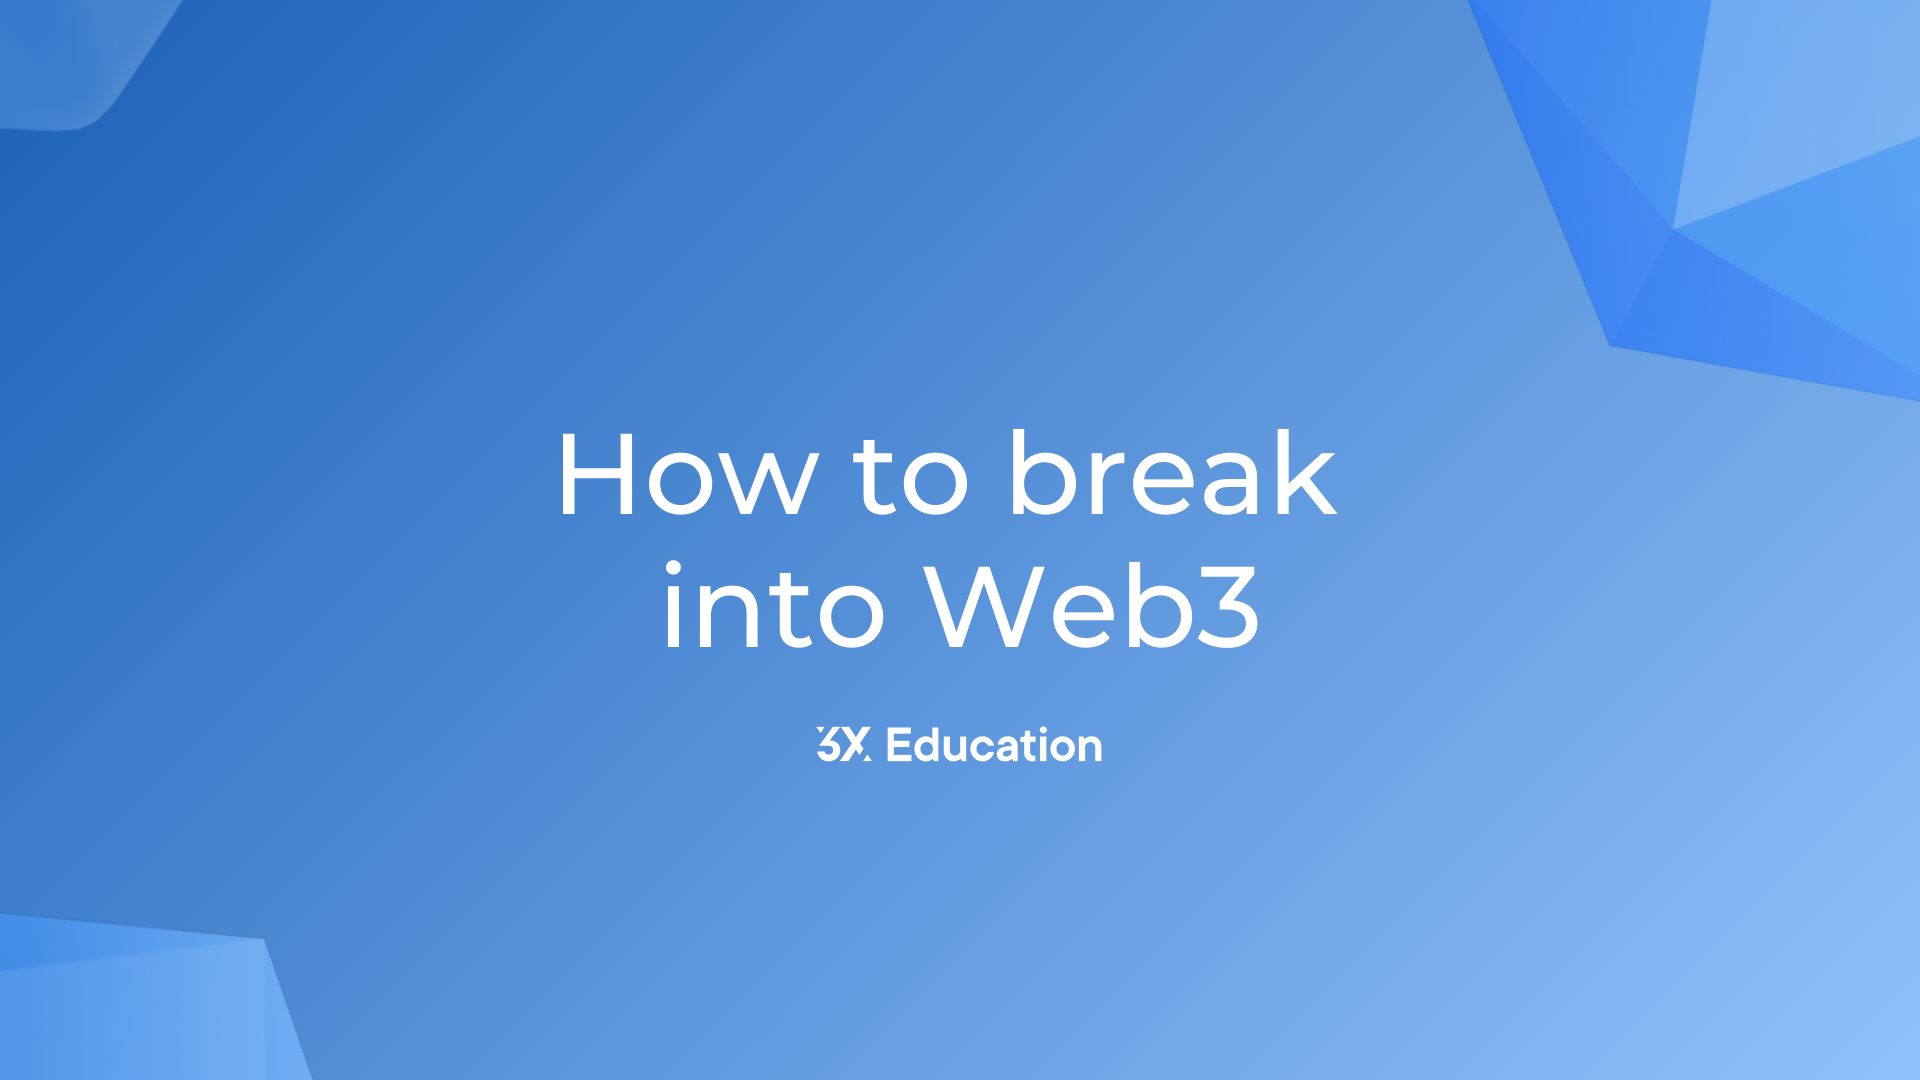 Intensive course "How to break into Web3 "